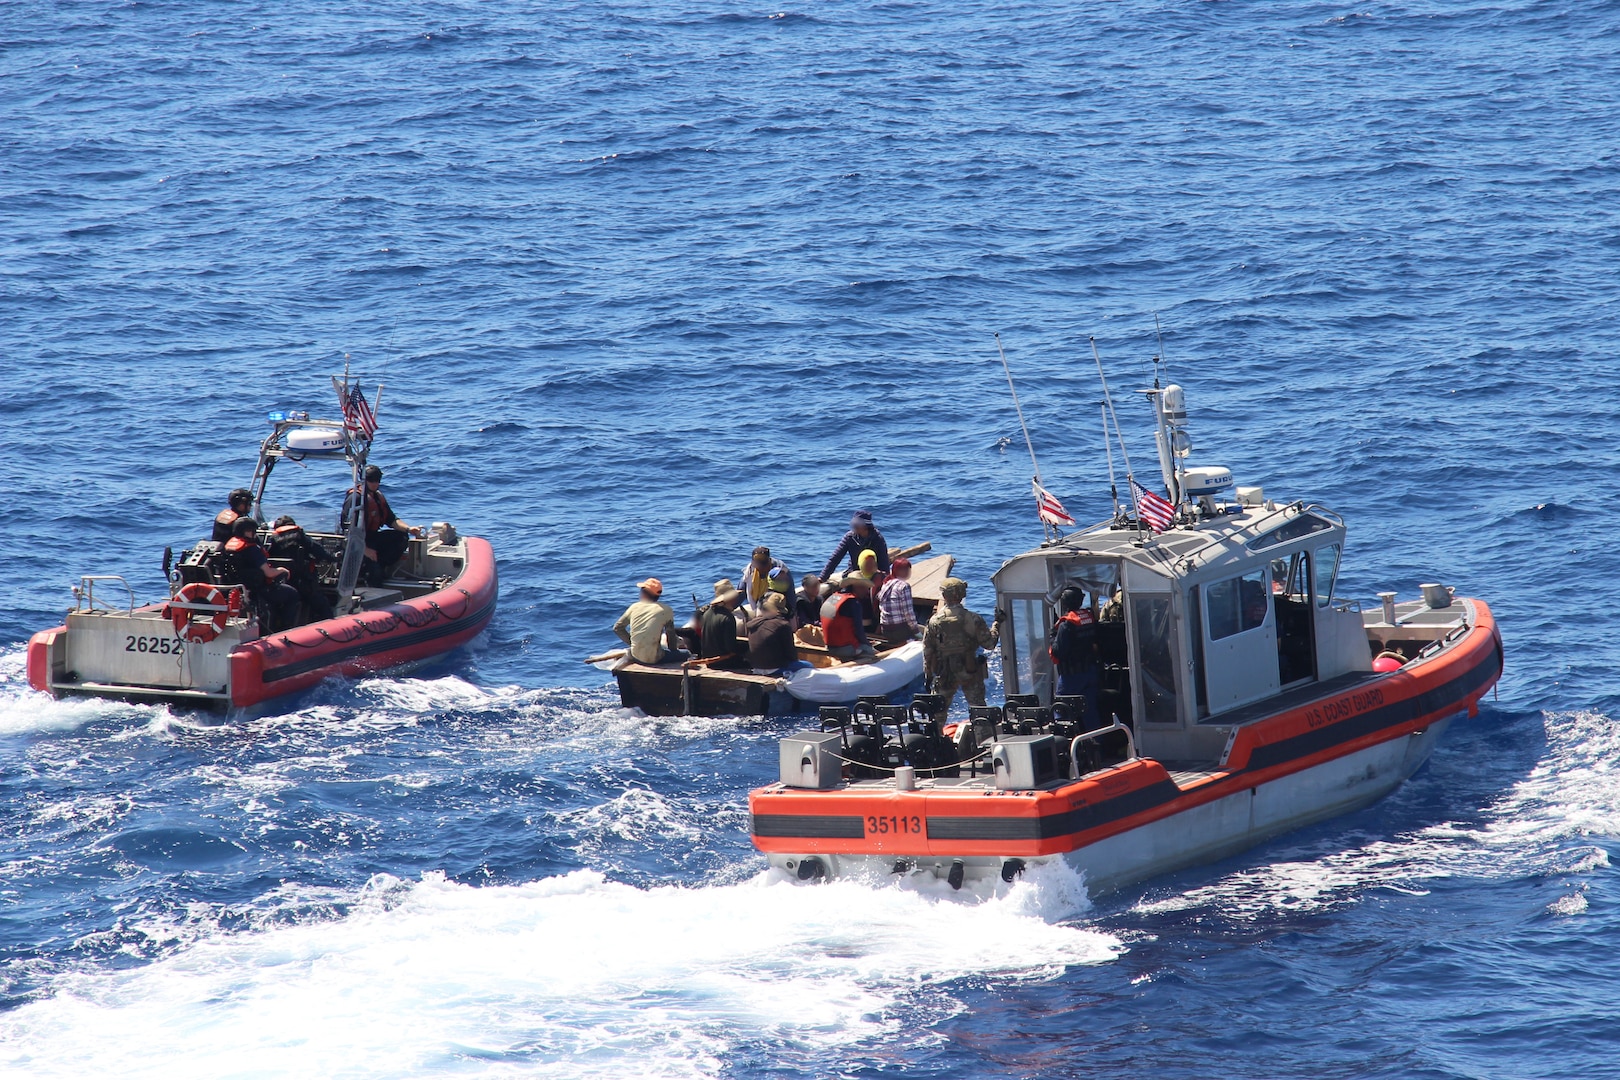 Coast Guard Cutter James' crew alerted District Seven watchstanders of a migrant vessel, at approximately noon, Feb. 21, 2023, about 20 miles north of Cayo Fragoso, Cuba. The people were repatriated on Feb. 24, 2023. (U.S. Coast Guard courtesy photo)